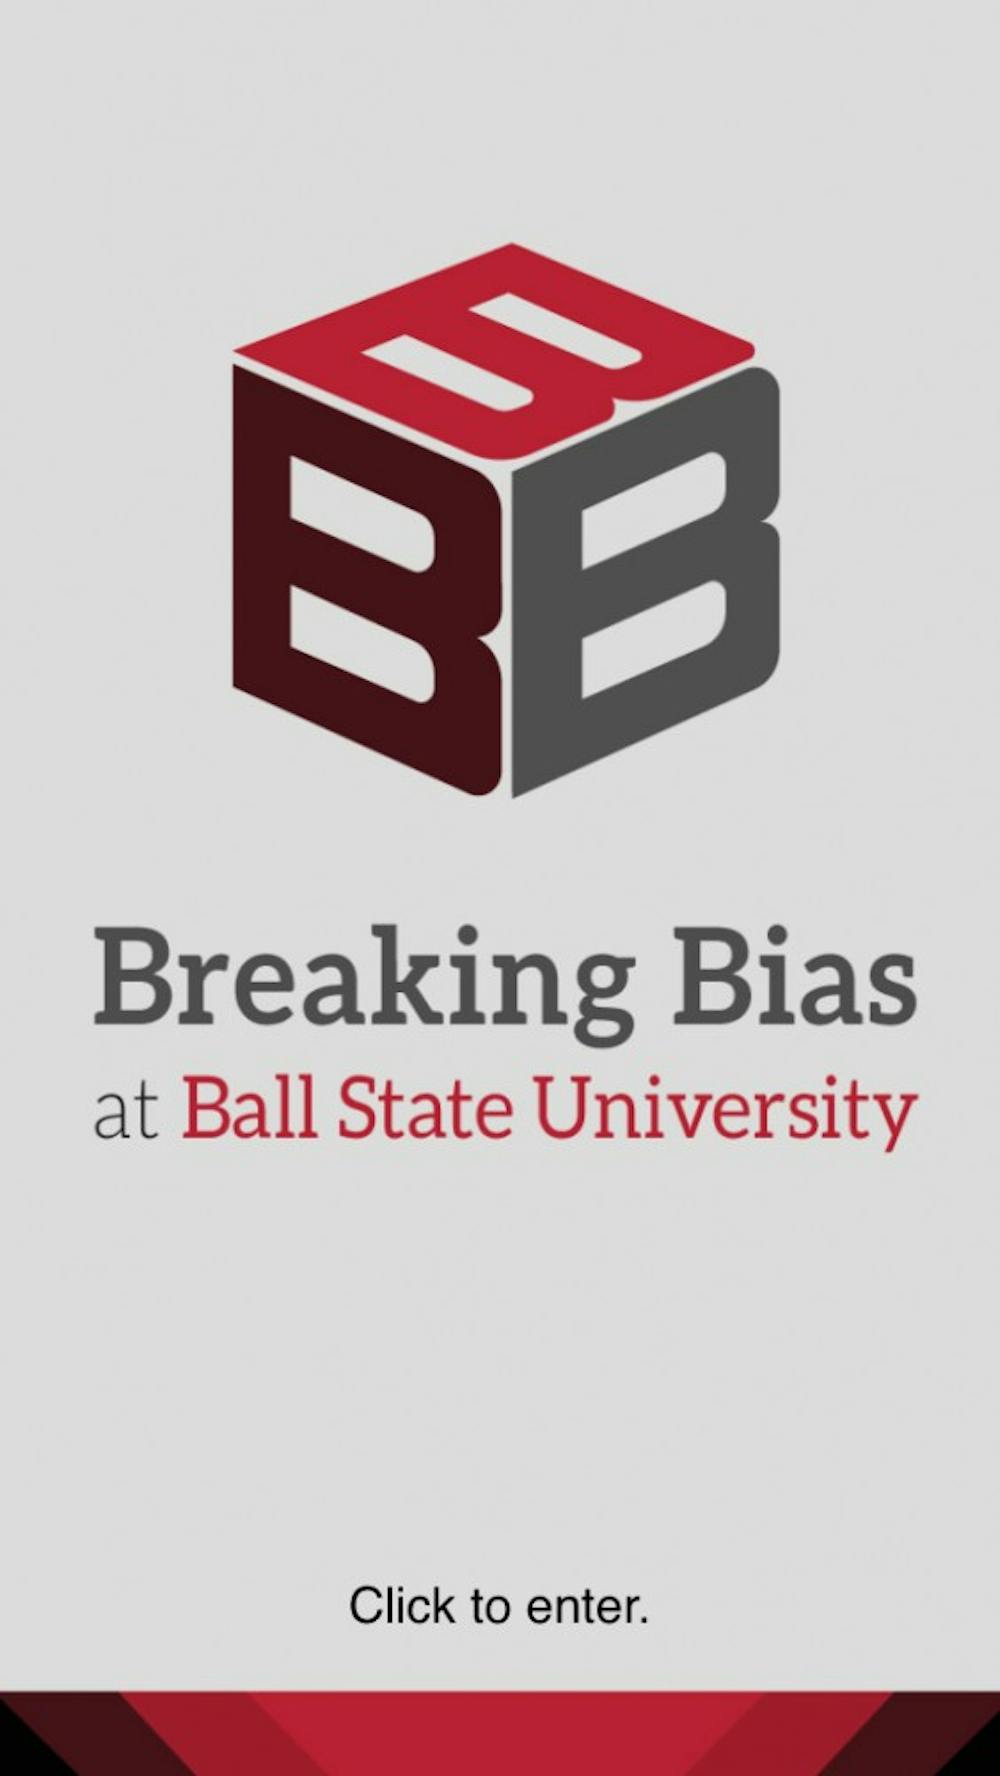 The University Information Technology department developed the B-3 app, Breaking Bias at Ball State University. The app's key features includes definitions of bias, hate crimes and discrimination, and aims to provide students with resources and contact information they can refer to when experiencing bias. Grace Ramey // DN